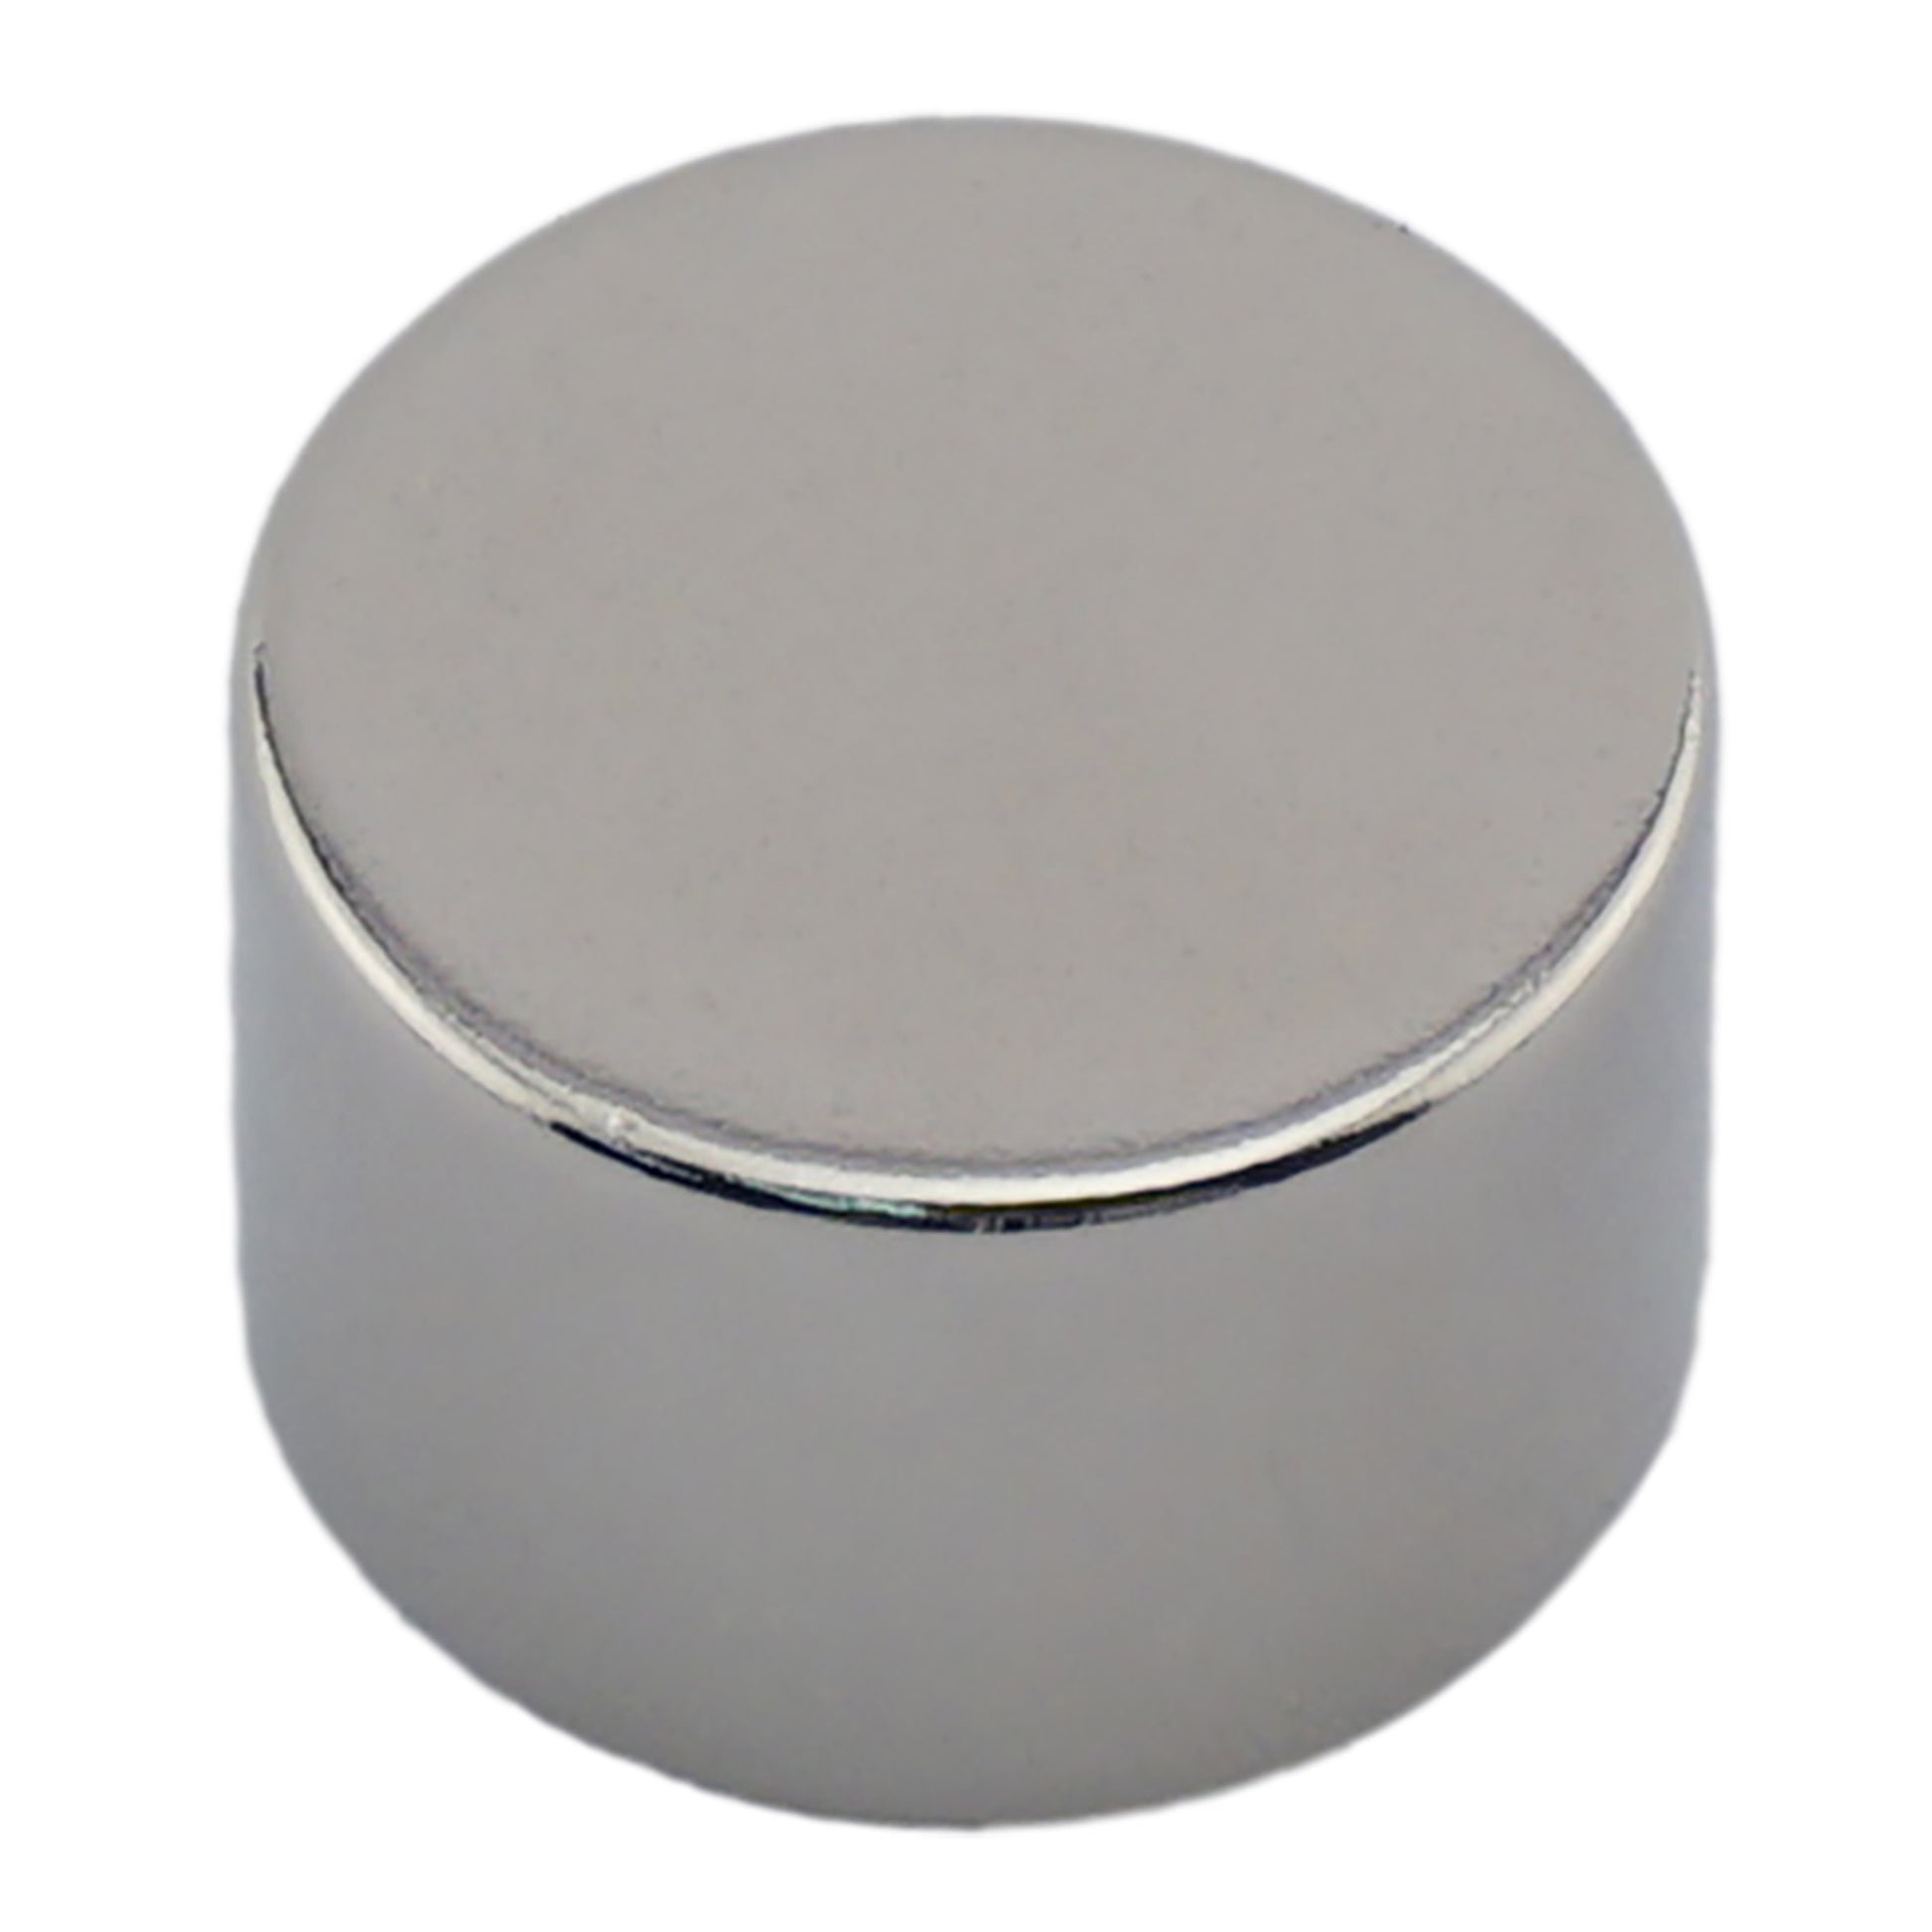 Load image into Gallery viewer, ND007527N Neodymium Disc Magnet - Front View